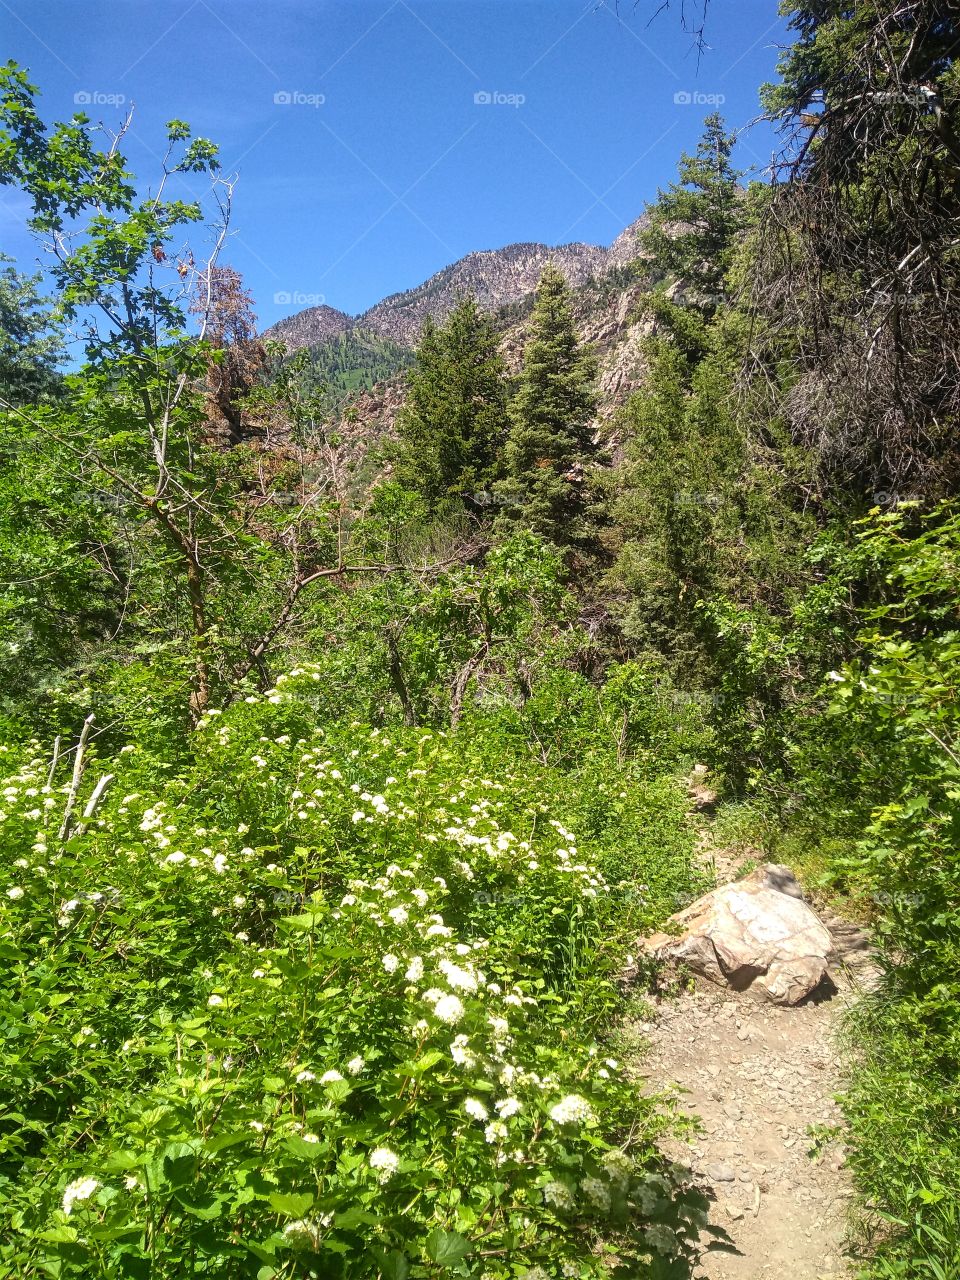 View of the Wasatch Mountains. Big Cottonwood Canyon, Utah